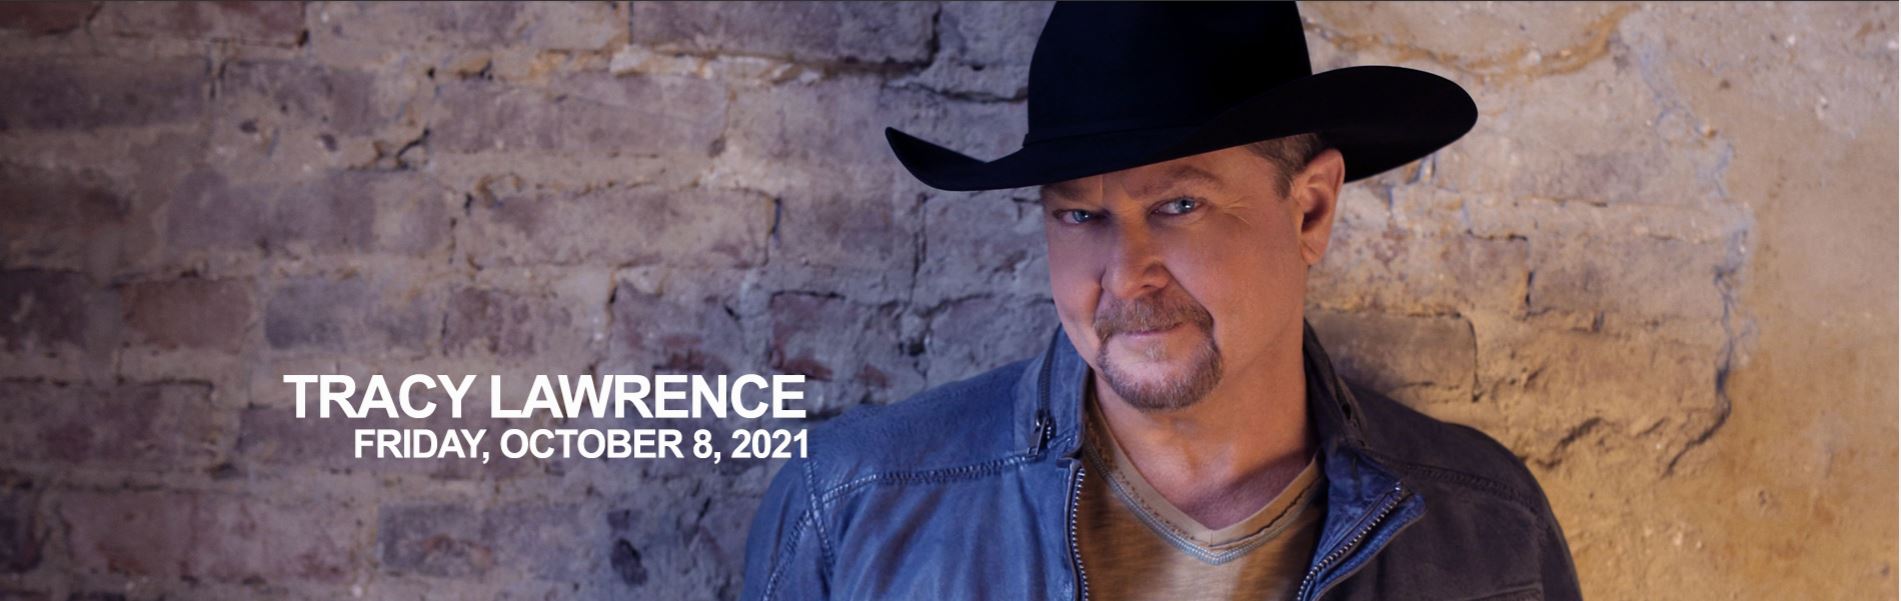 tracy lawrence